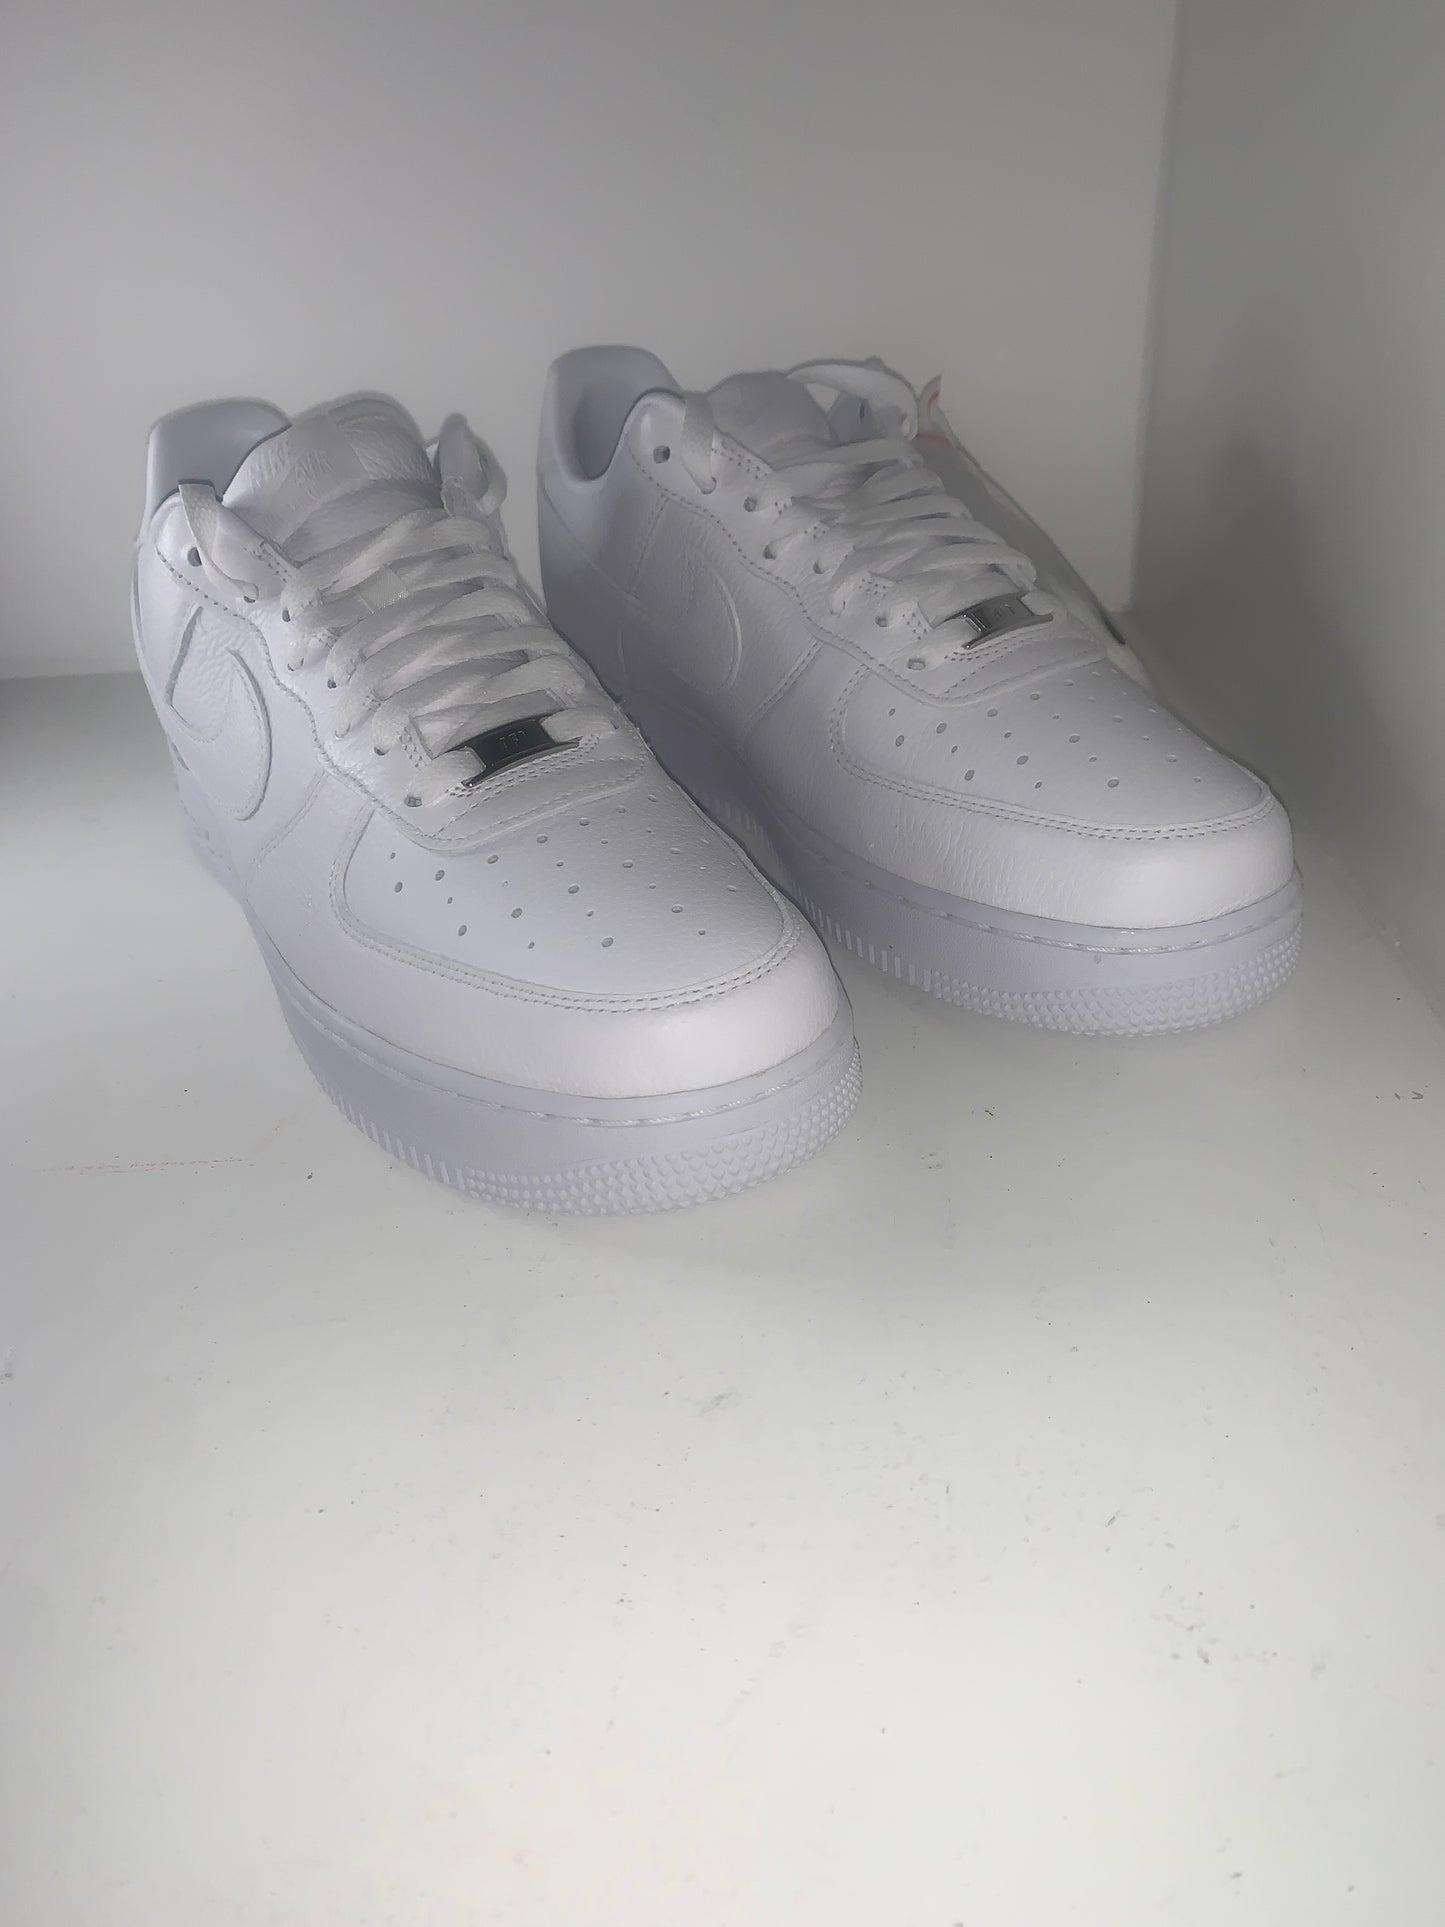 NIKE AIR FORCE 1 LOW X NOCTA CERTIFIED LOVER BOY